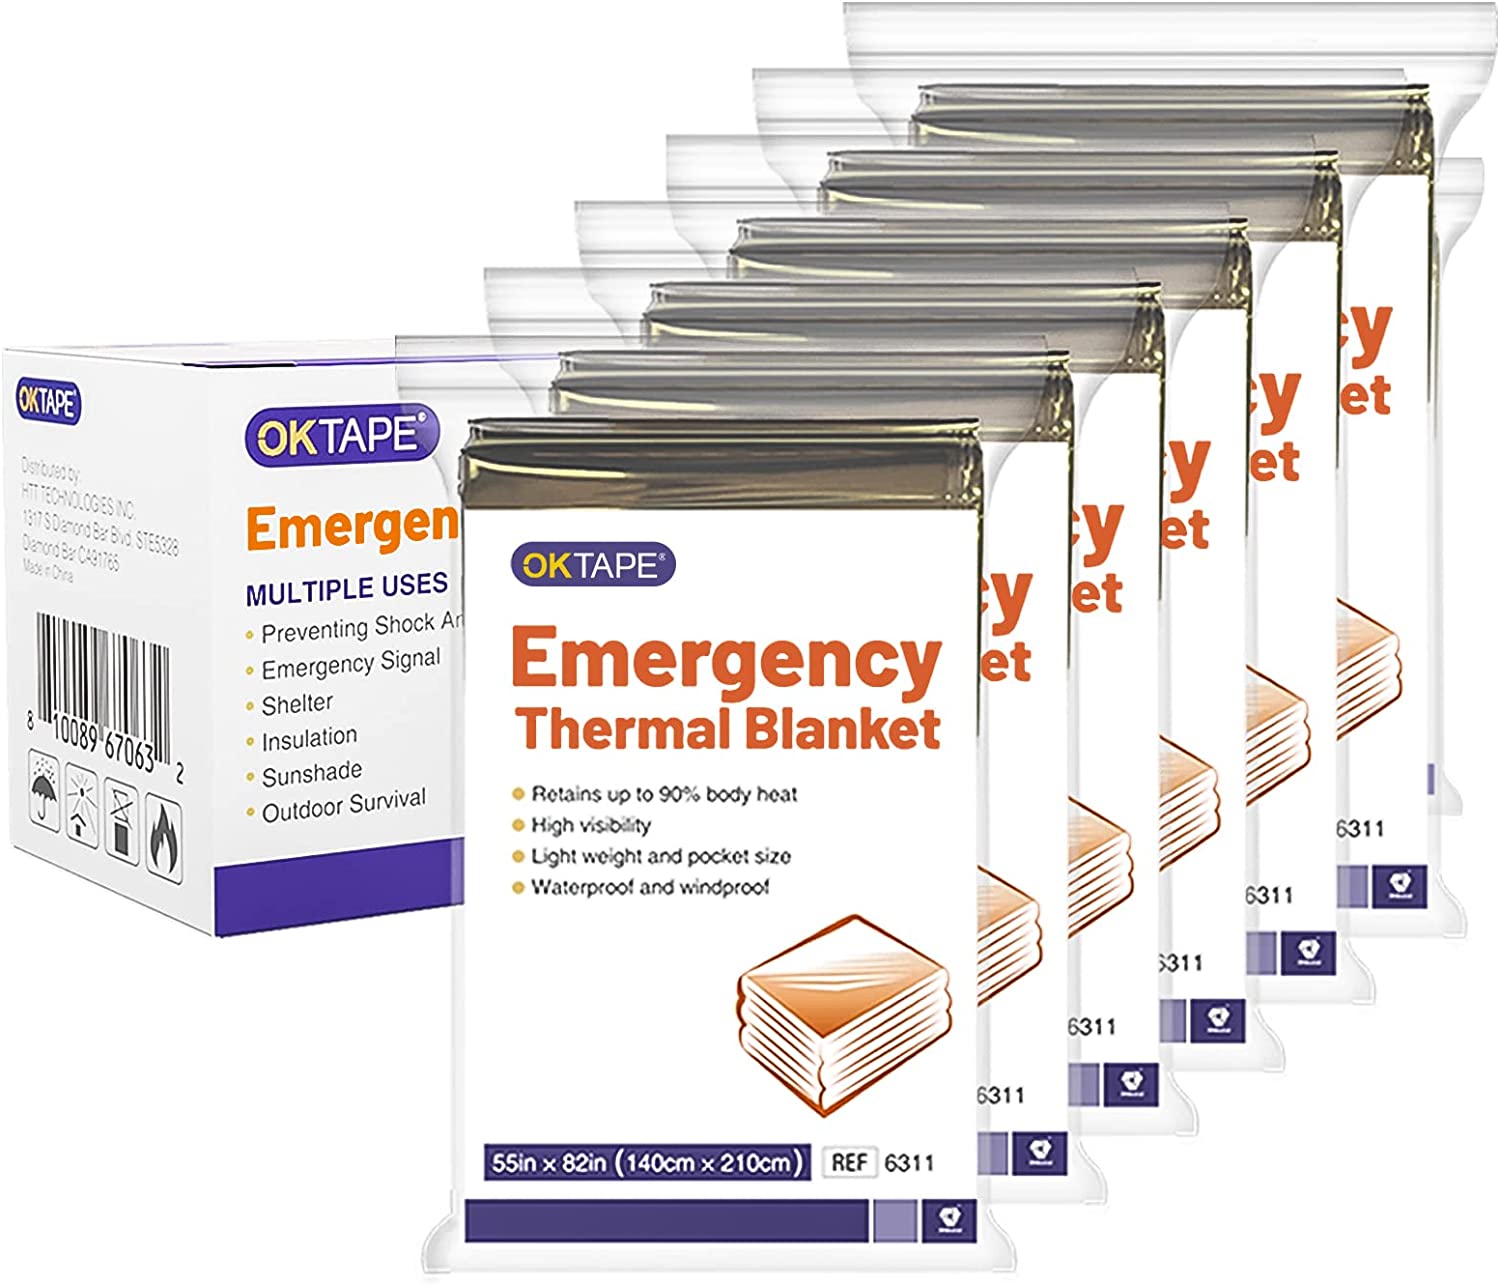 OK TAPE Emergency Thermal Blankets (6 Packs), Space Blanket Survival Gear and Equipment First Aid Kit, Emergency Blanket, Camping Blanket, Outdoors, Hiking, Marathons or First aids